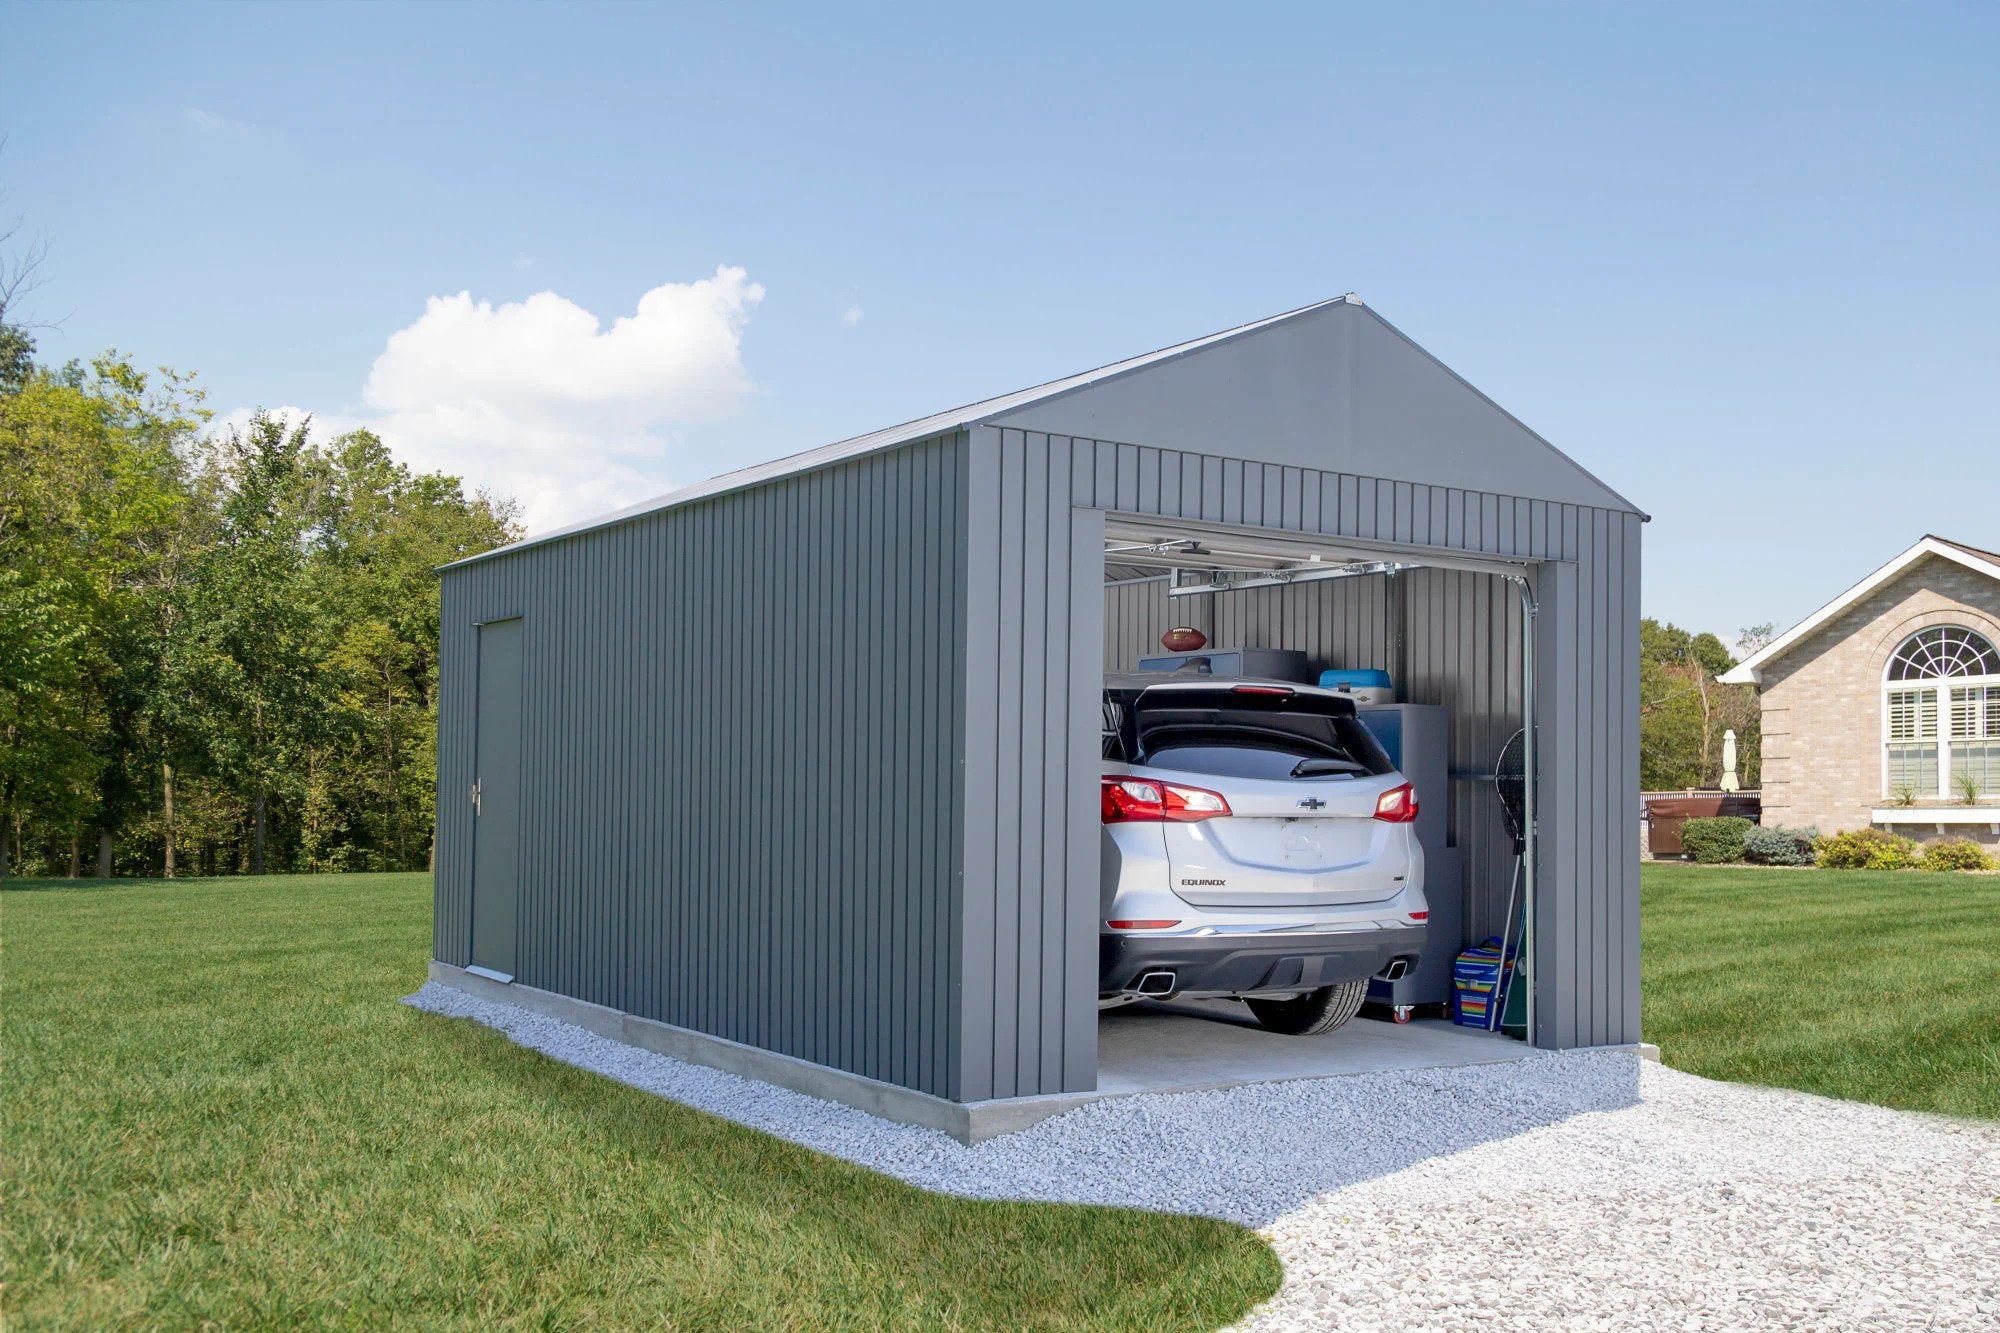 sojag everest detached garage in charcoal with roll up and side entry swing door and vehicle parked inside